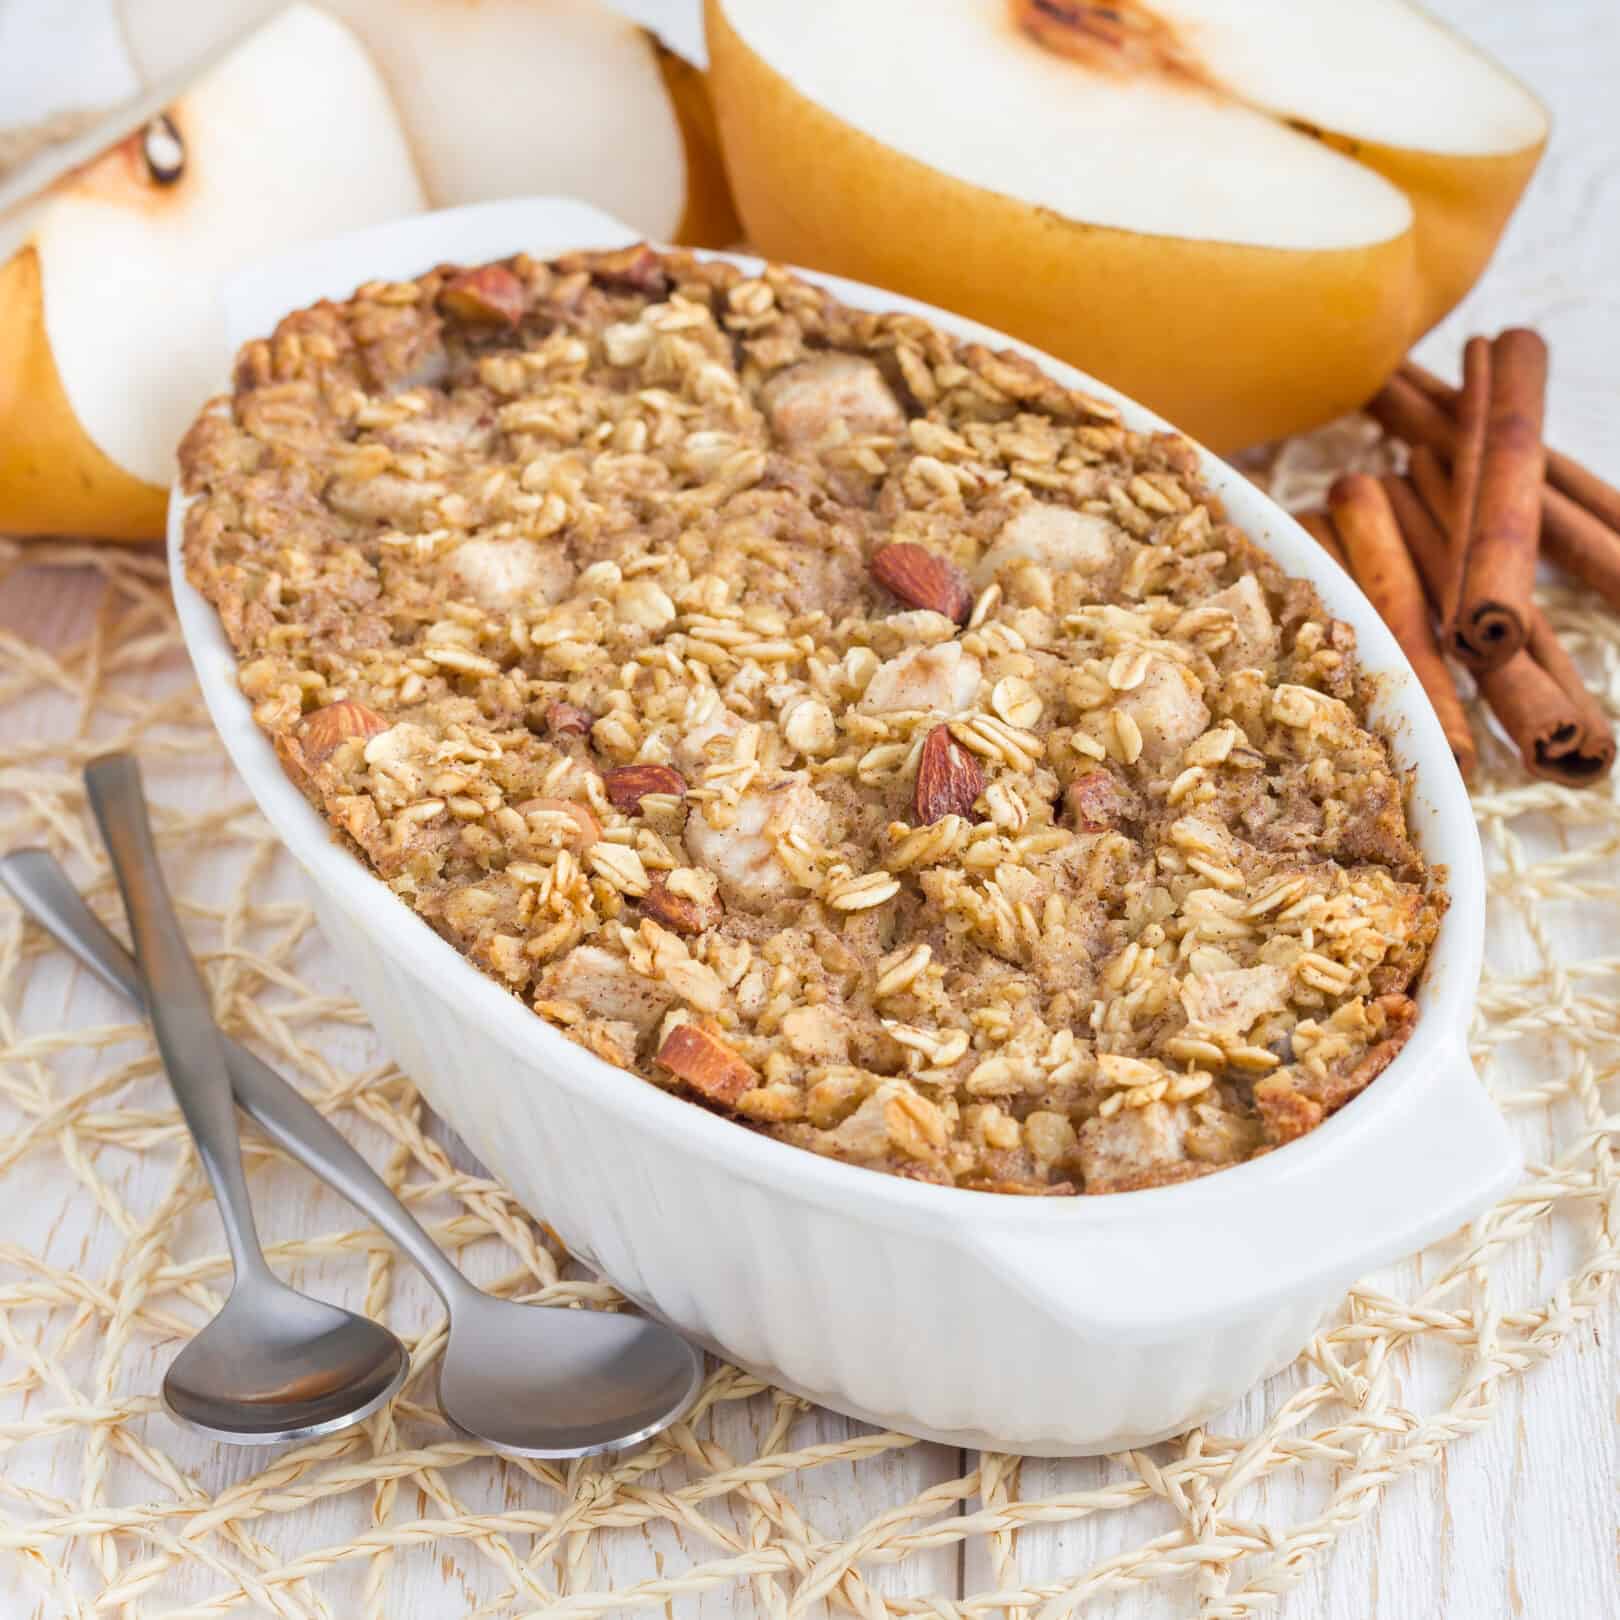 Baked Oatmeal with Pears